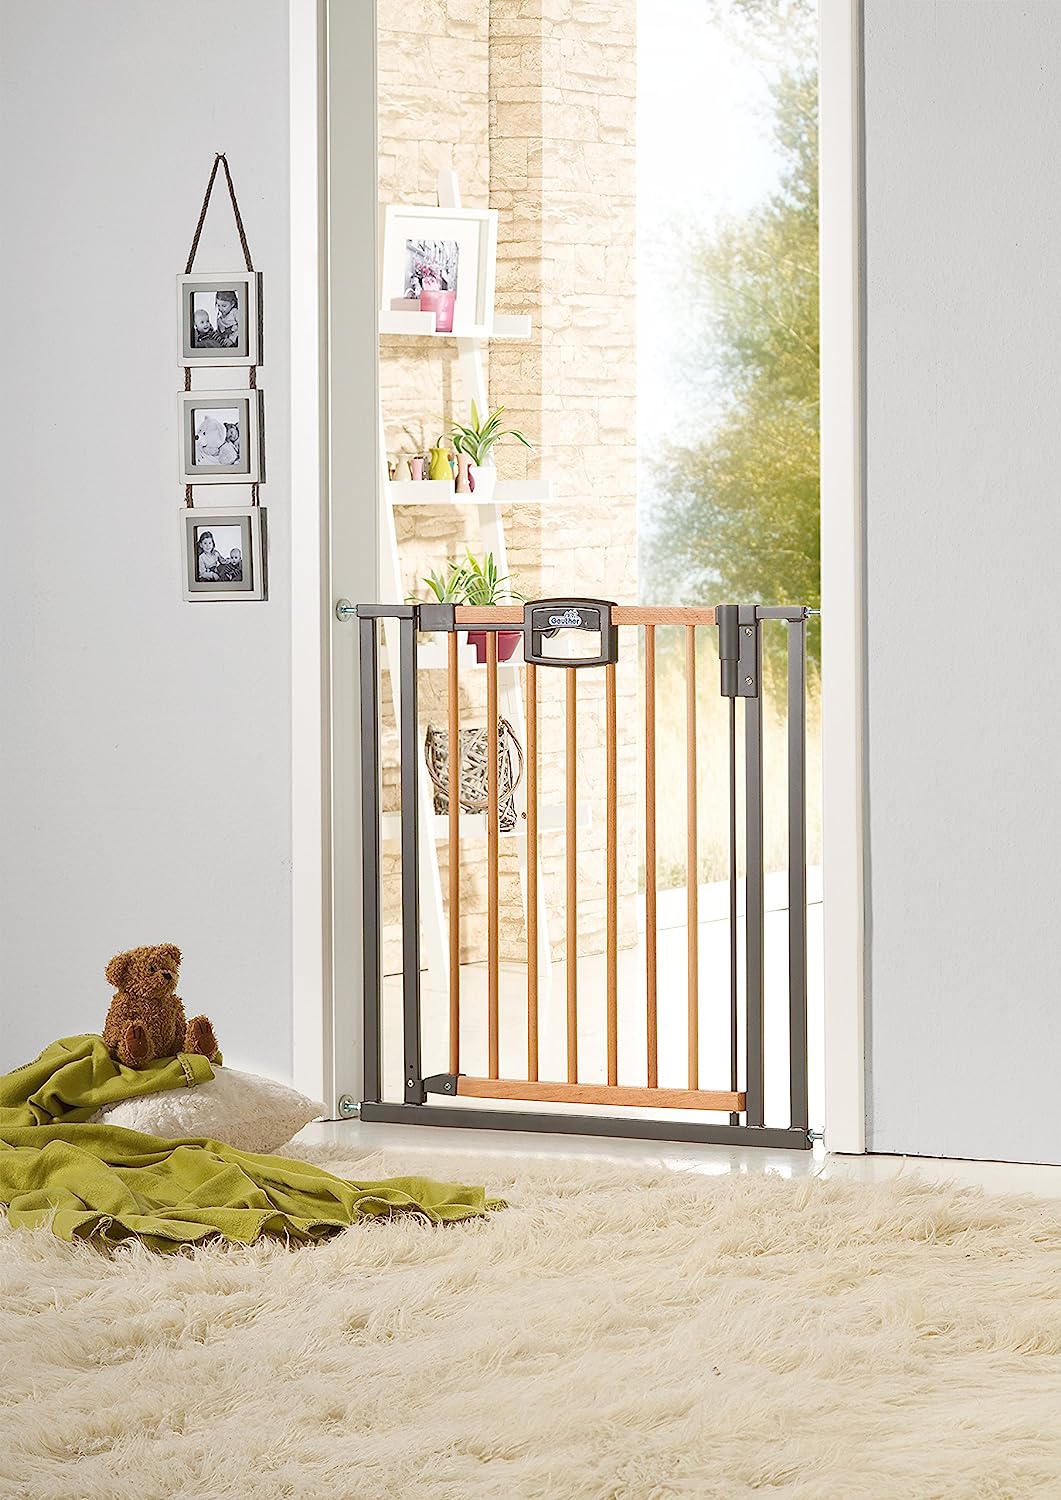 Geuther - Easylock + Door Safety Gate / Easylock Wood+, for Children, Dogs and Cats, No Drilling, Convertible into Stair Gate, Metal or Wood/Metal, White/Silver or Natural/Silver